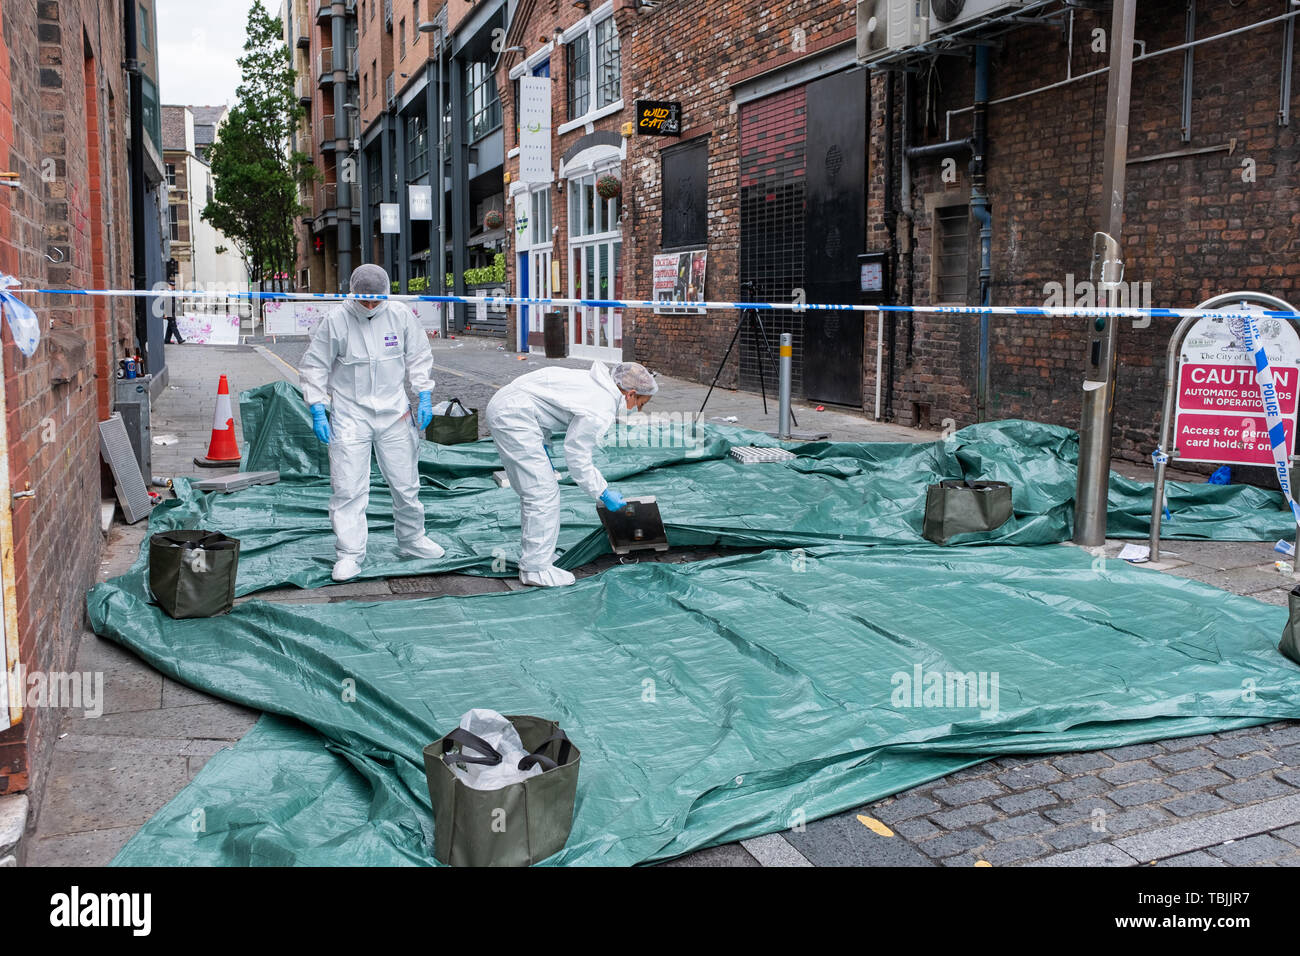 Liverpool, UK. June 2, 2019. A murder investigation was launched by Merseyside Police in Liverpool city centre. A man died after being stabbed when a fight broke out at Wild Cat and Ink bars on Back Colquitt Street around 3am on Sunday, June 2, 2019. A 33-year-old man from Liverpool who suffered a stab wound to his chest was taken to hospital where he died a short time later. The incident happened following Liverpool's Champions League final success. Credit: Christopher Middleton/Alamy Live News Stock Photo